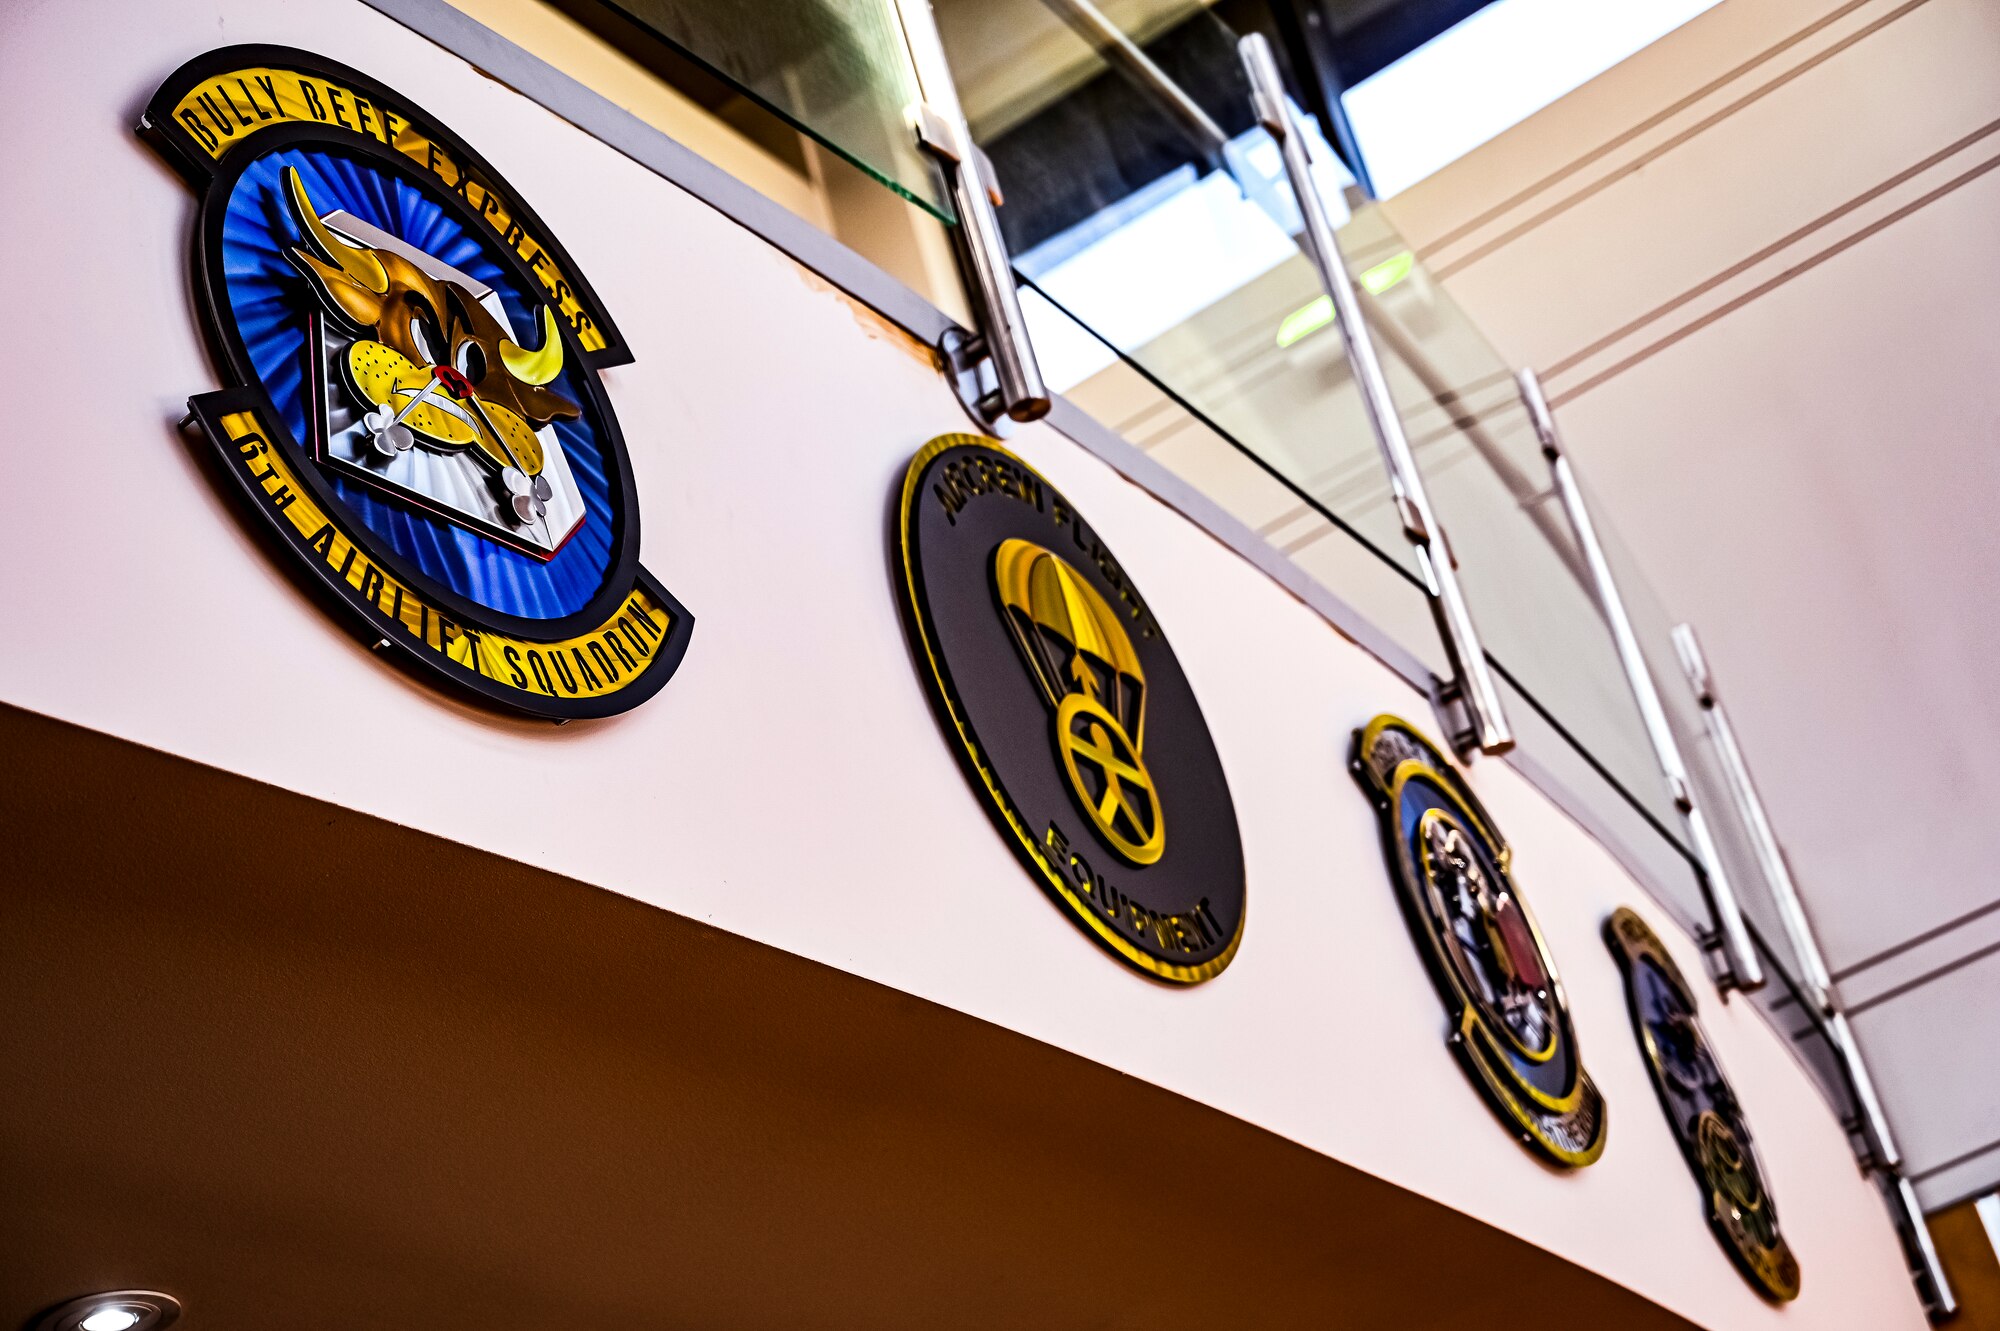 305th Air Mobility Wing Squadron emblems are displayed at the Consolidated Maintenance Operations Facility building prior to the arrival of U.S. Air Force Maj. Gen. Albert Miller, Aircrew Task Force director, at Joint Base McGuire-Dix-Lakehurst, N.J. on Aug. 25, 2022. Miller has amplified community outreach to aircrew members in the field through increased site visits. These visits provide a chance to have meaningful discussions with all aircrew members to capture operational, quality of life, and quality of service concerns to inform policy decisions.